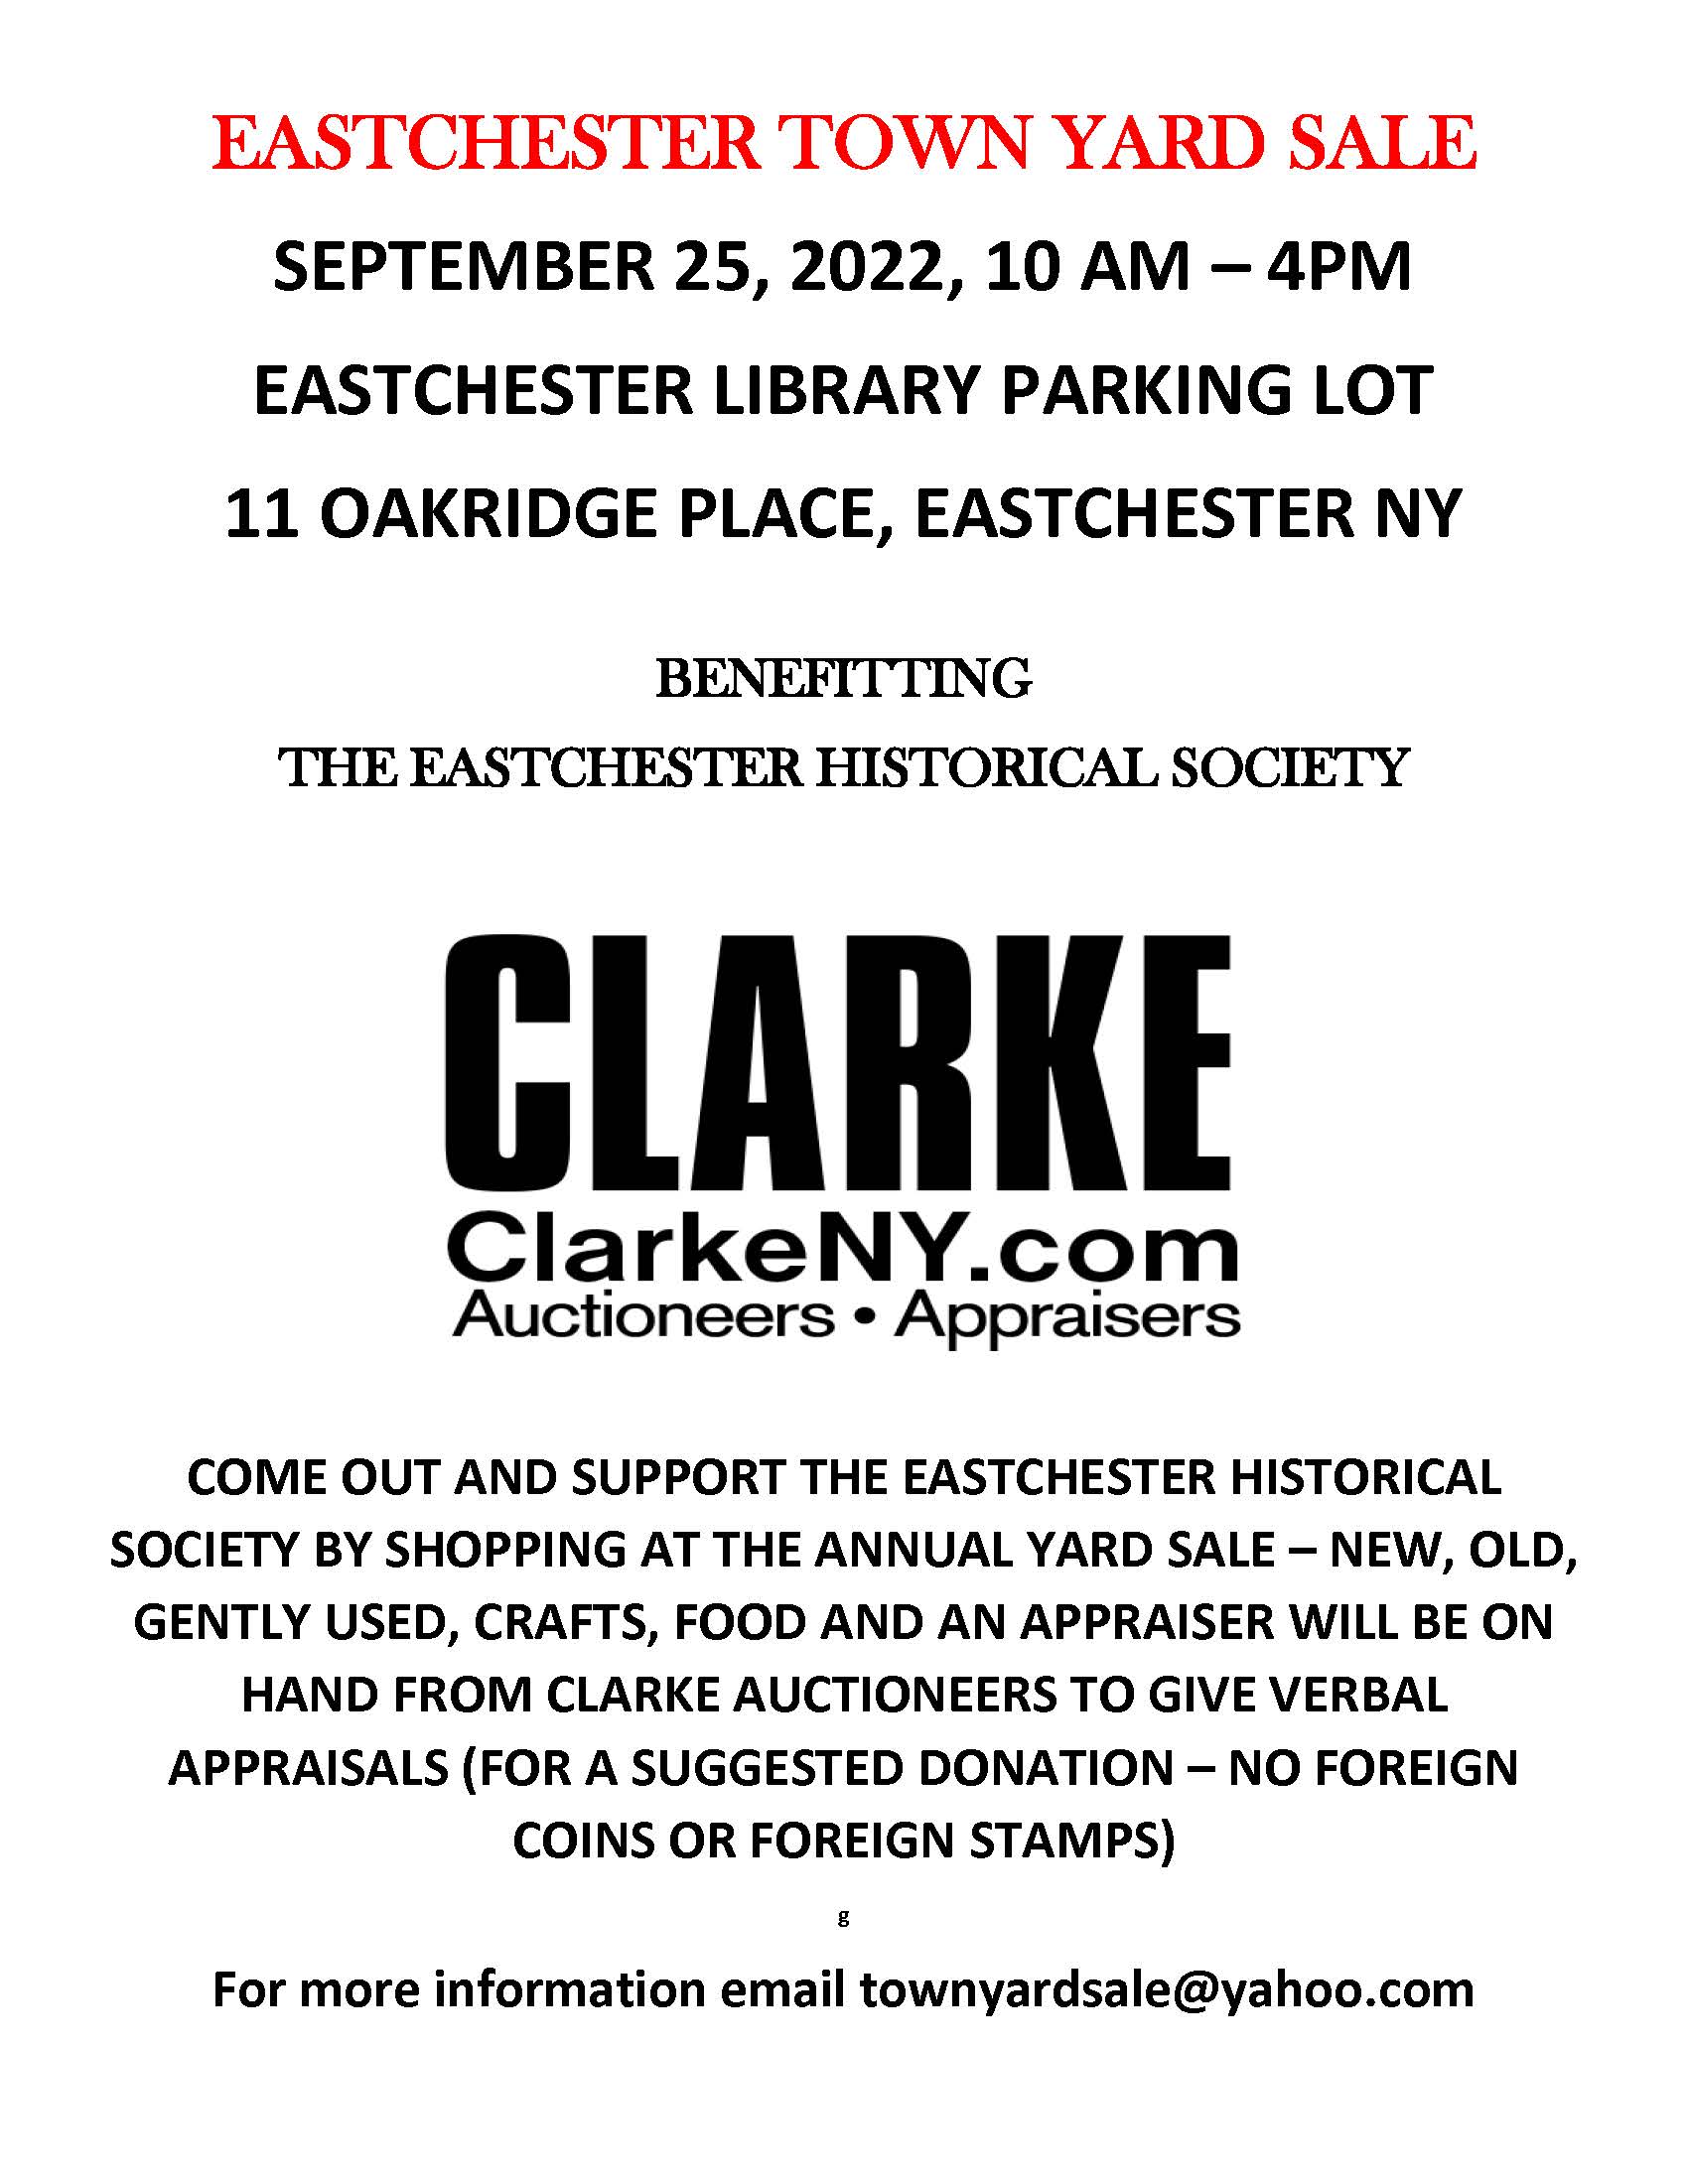 2022 EASTCHESTER TOWN YARD SALE flyer_Page_1